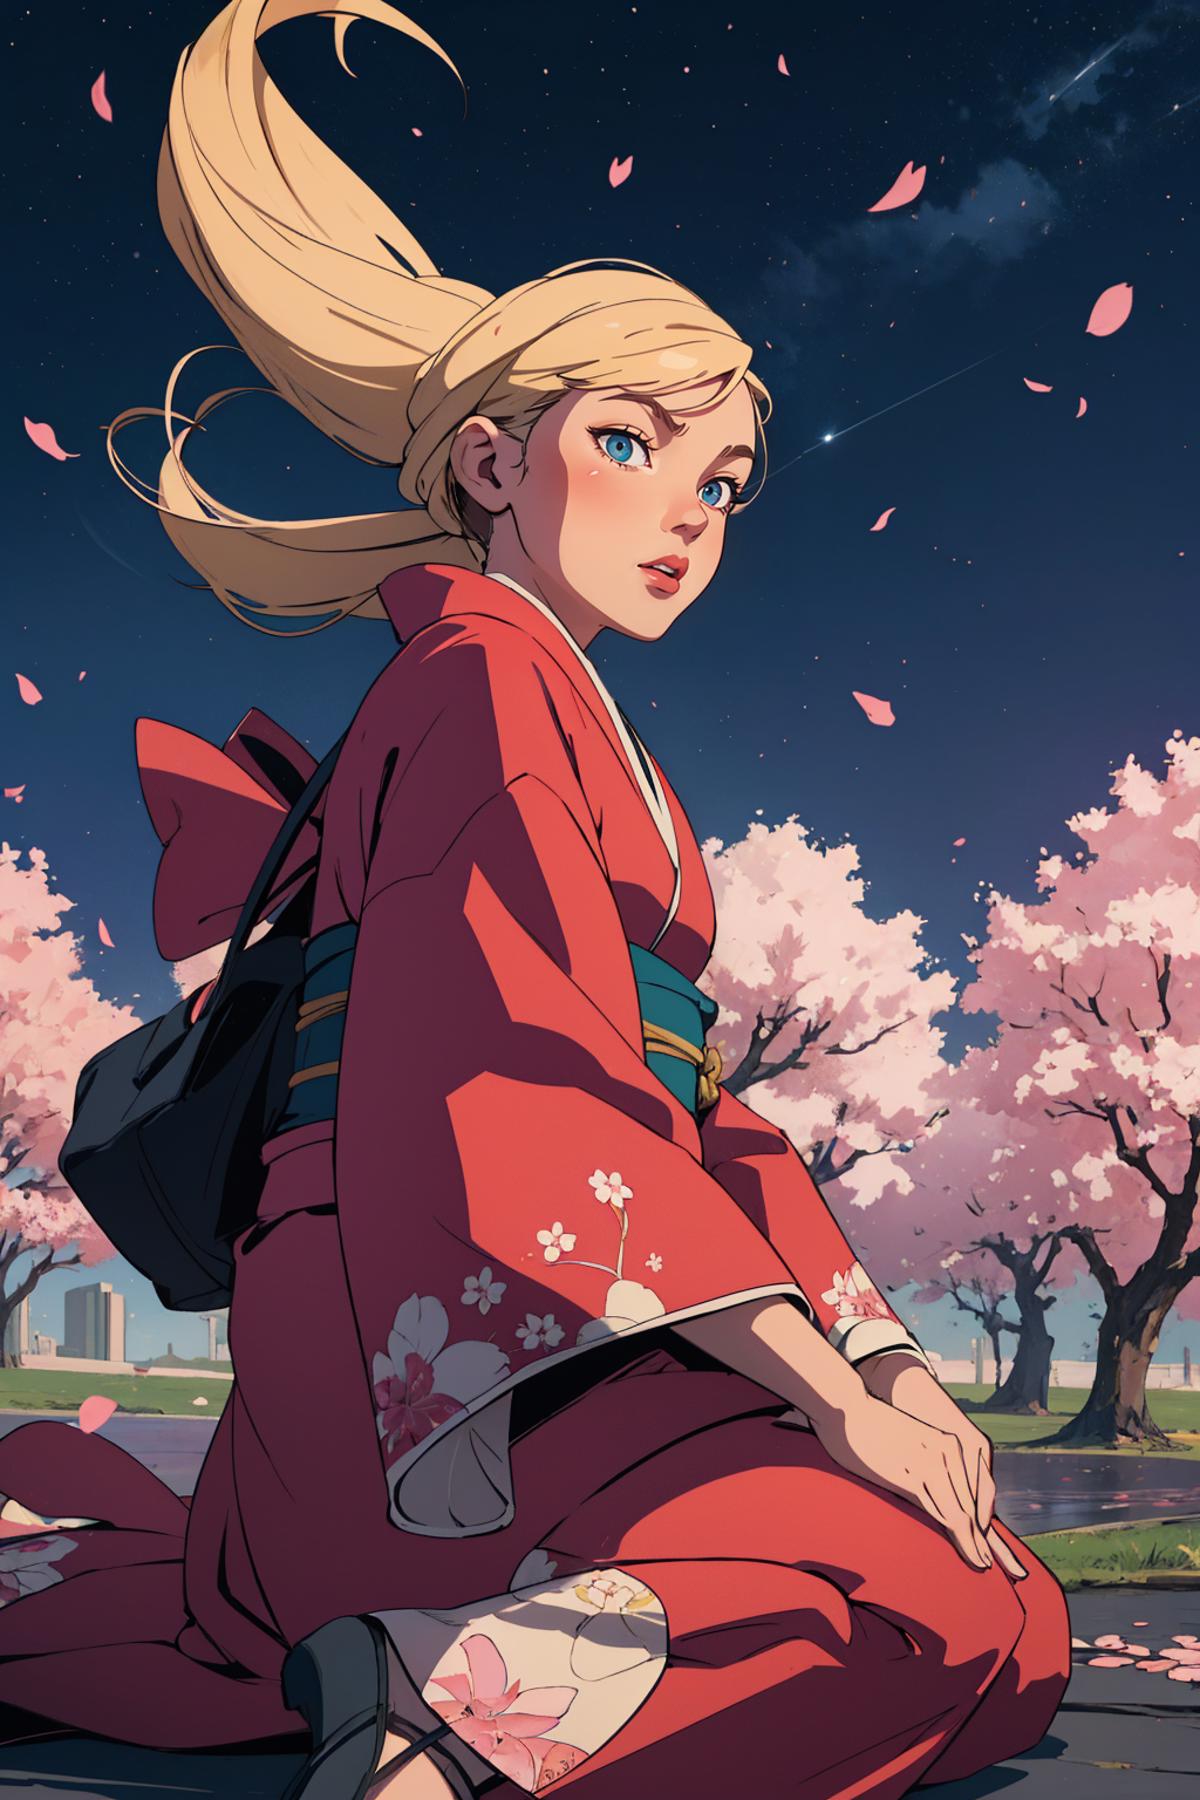 Anime Girl in a Pink Kimono with Pink Hair and Blue Eyes, Standing near Cherry Blossoms.